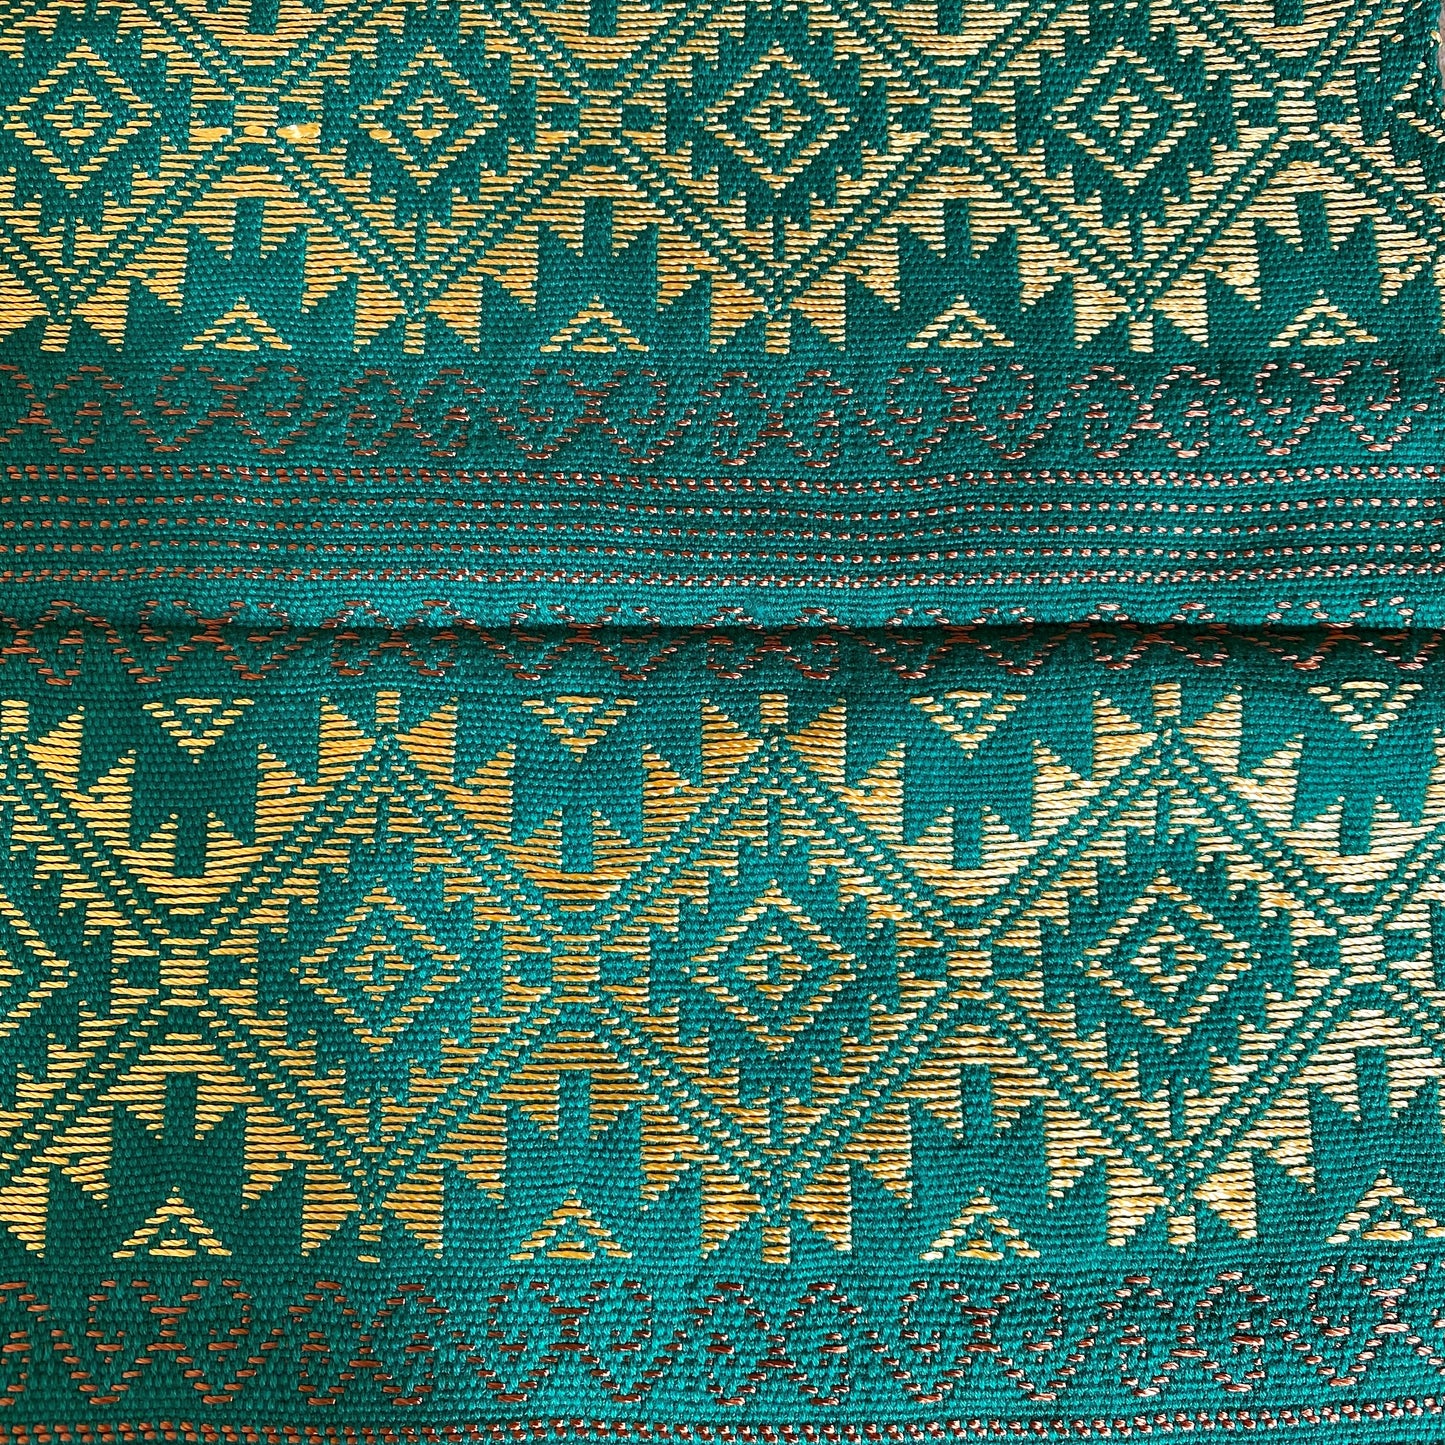 Comalapa Table Runner from Guatemala- Green and Yellow